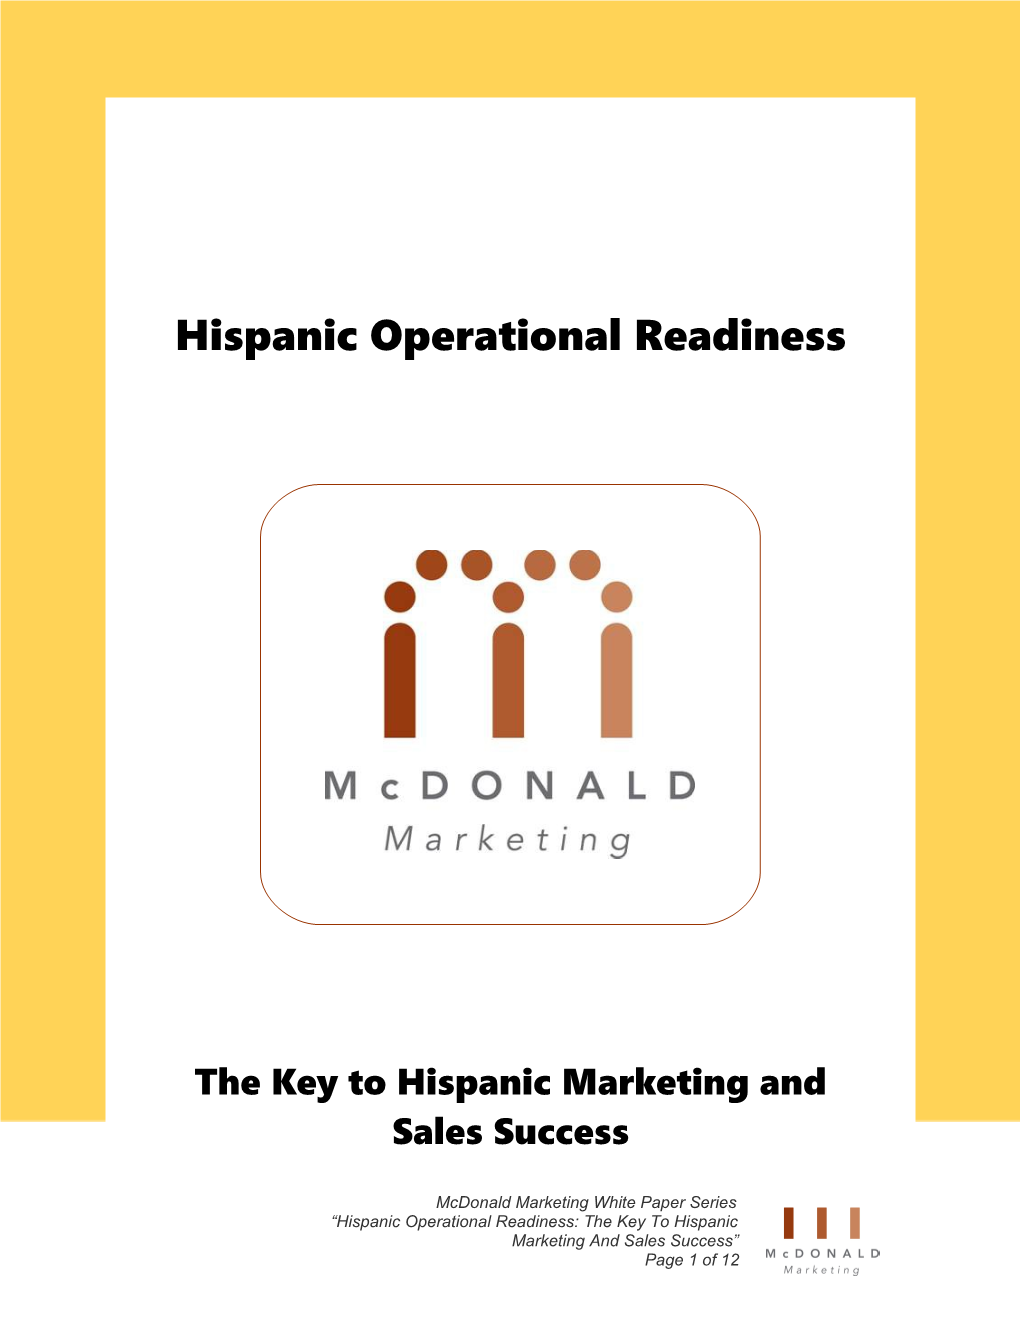 Just by Asking the Question Why Market to Hispanics